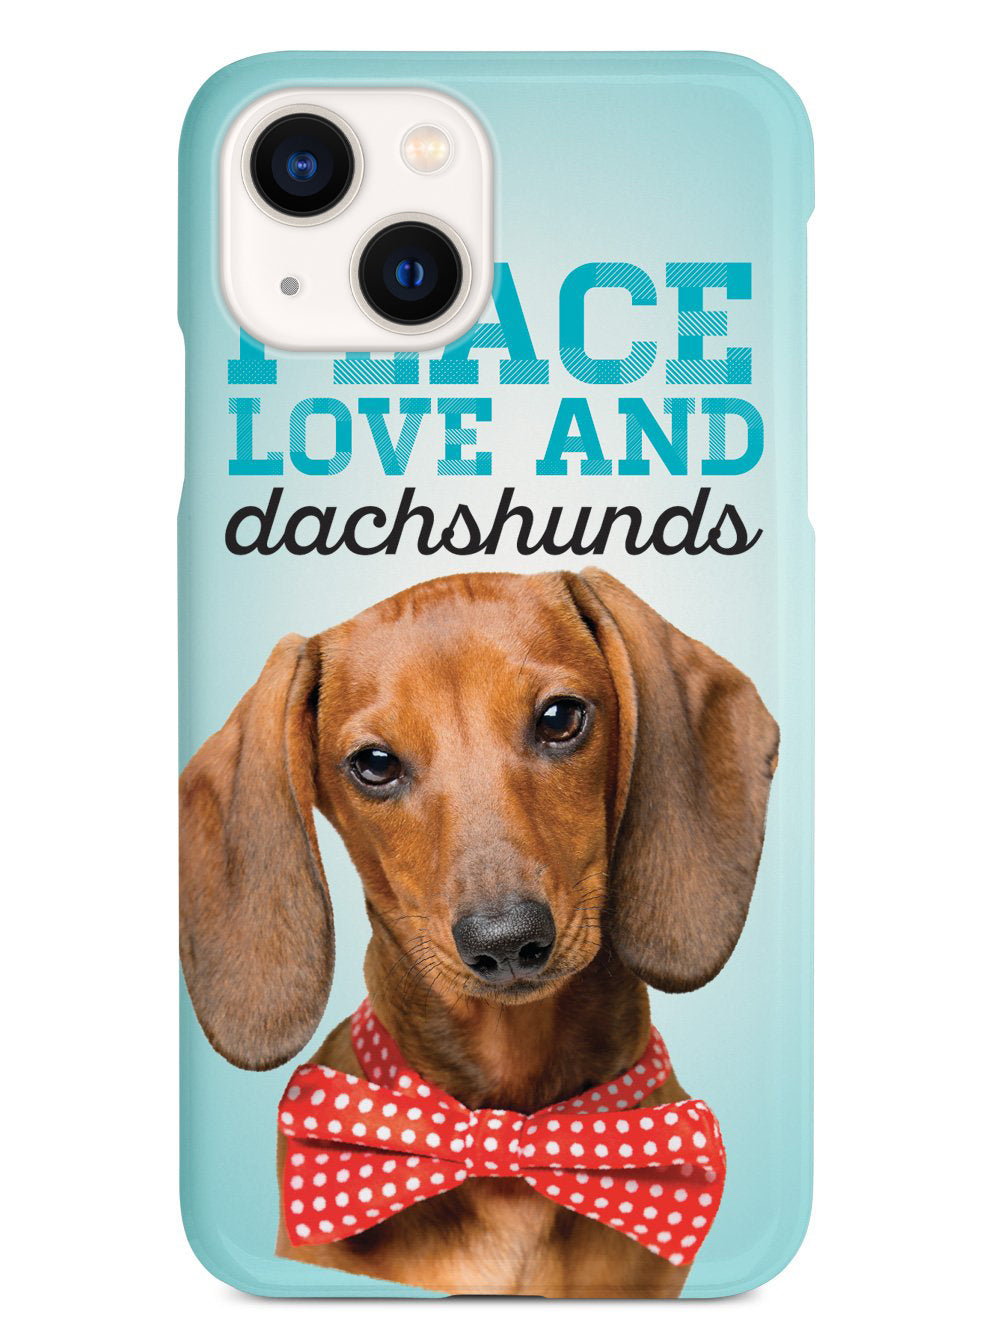 Peace Love and Dachshunds - Real Life Case